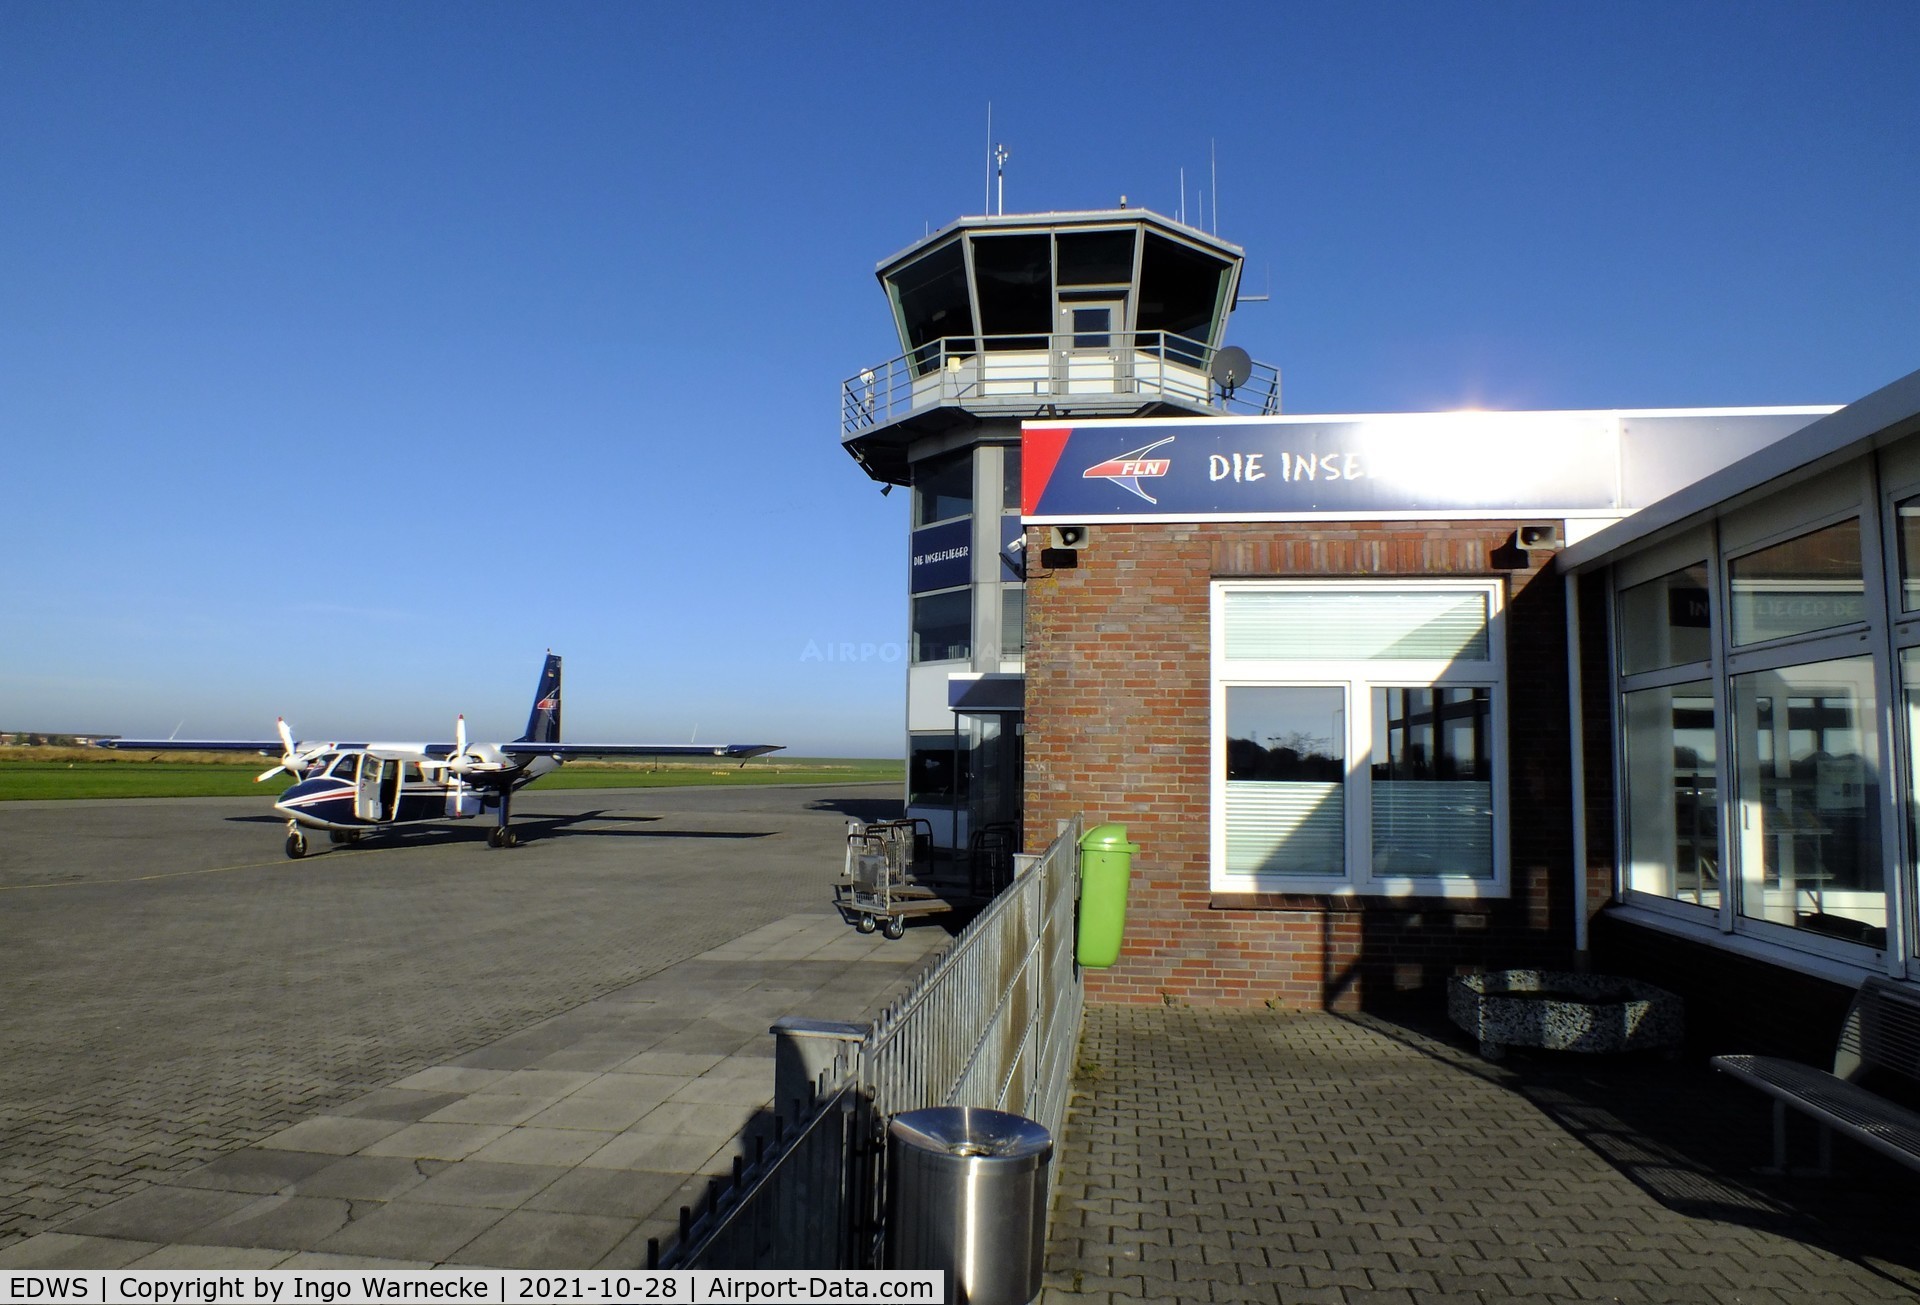 EDWS Airport - tower, terminal and apron at Norden-Norddeich airfield